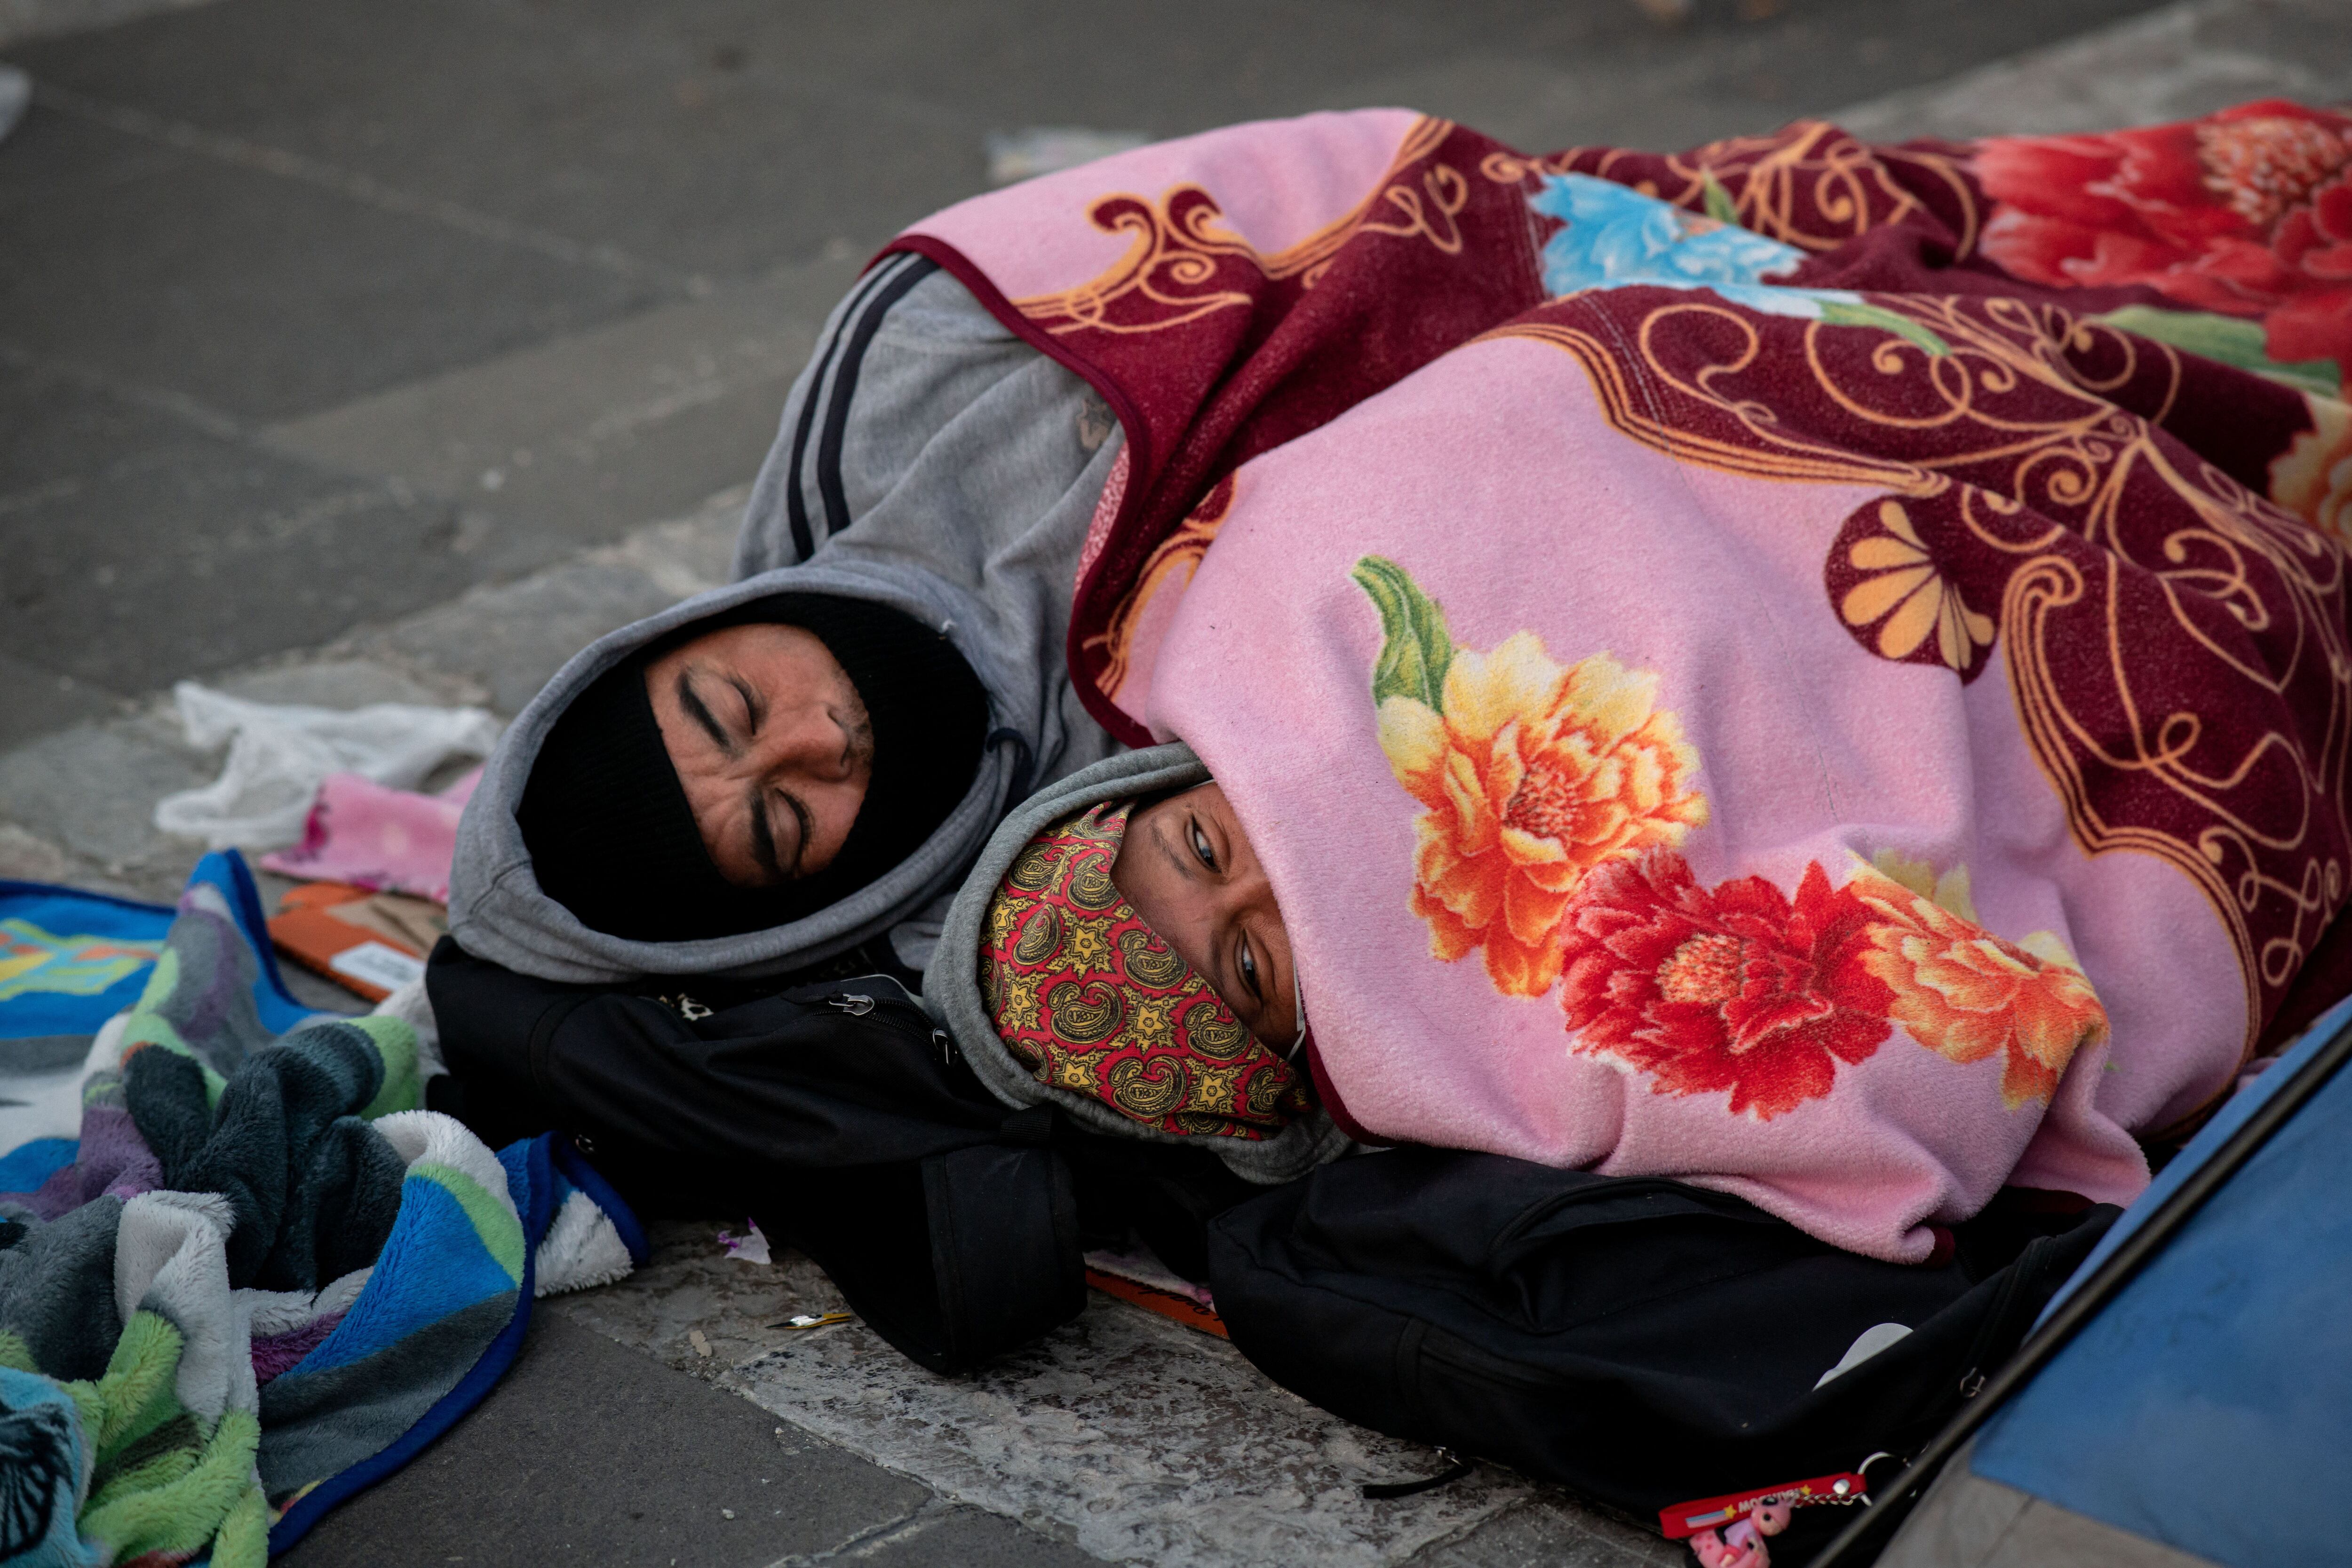 Pilgrims sleep on the floor outside the Basilica of Guadalupe in Mexico City.